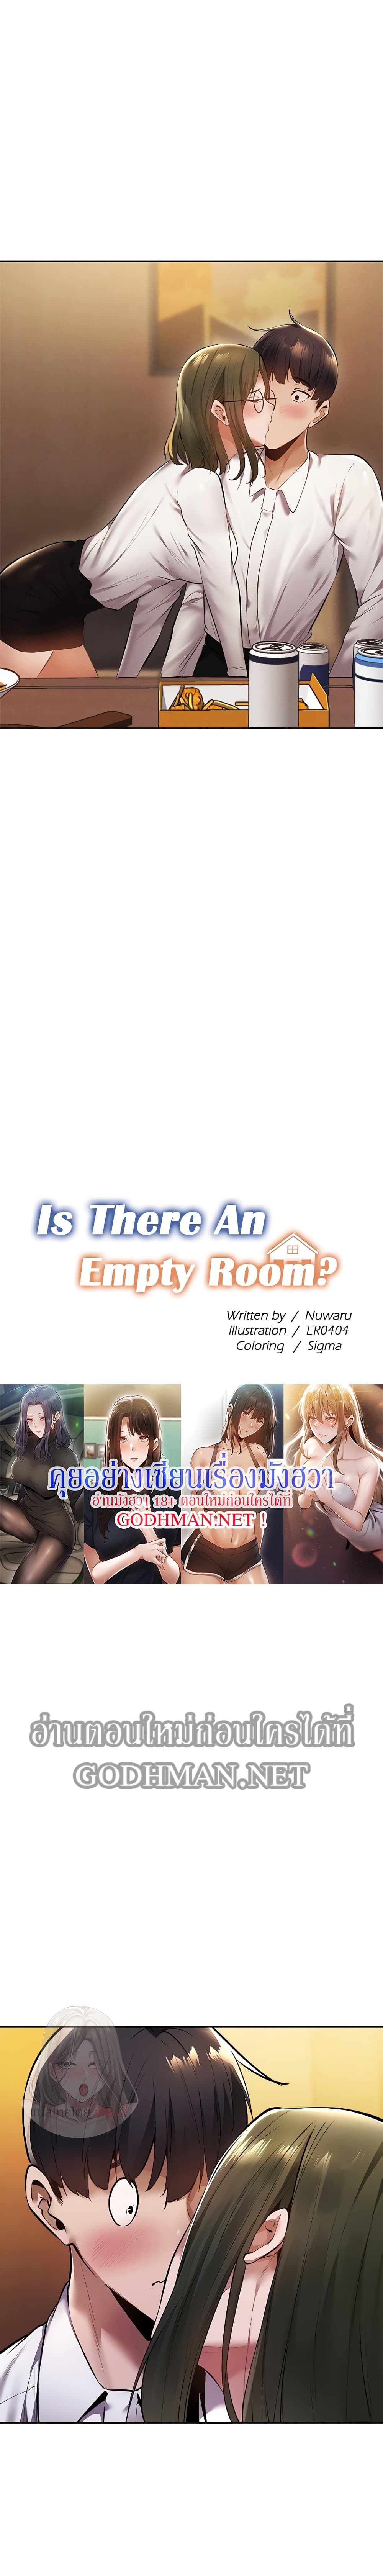 IS THERE AN EMPTY ROOM 59 04